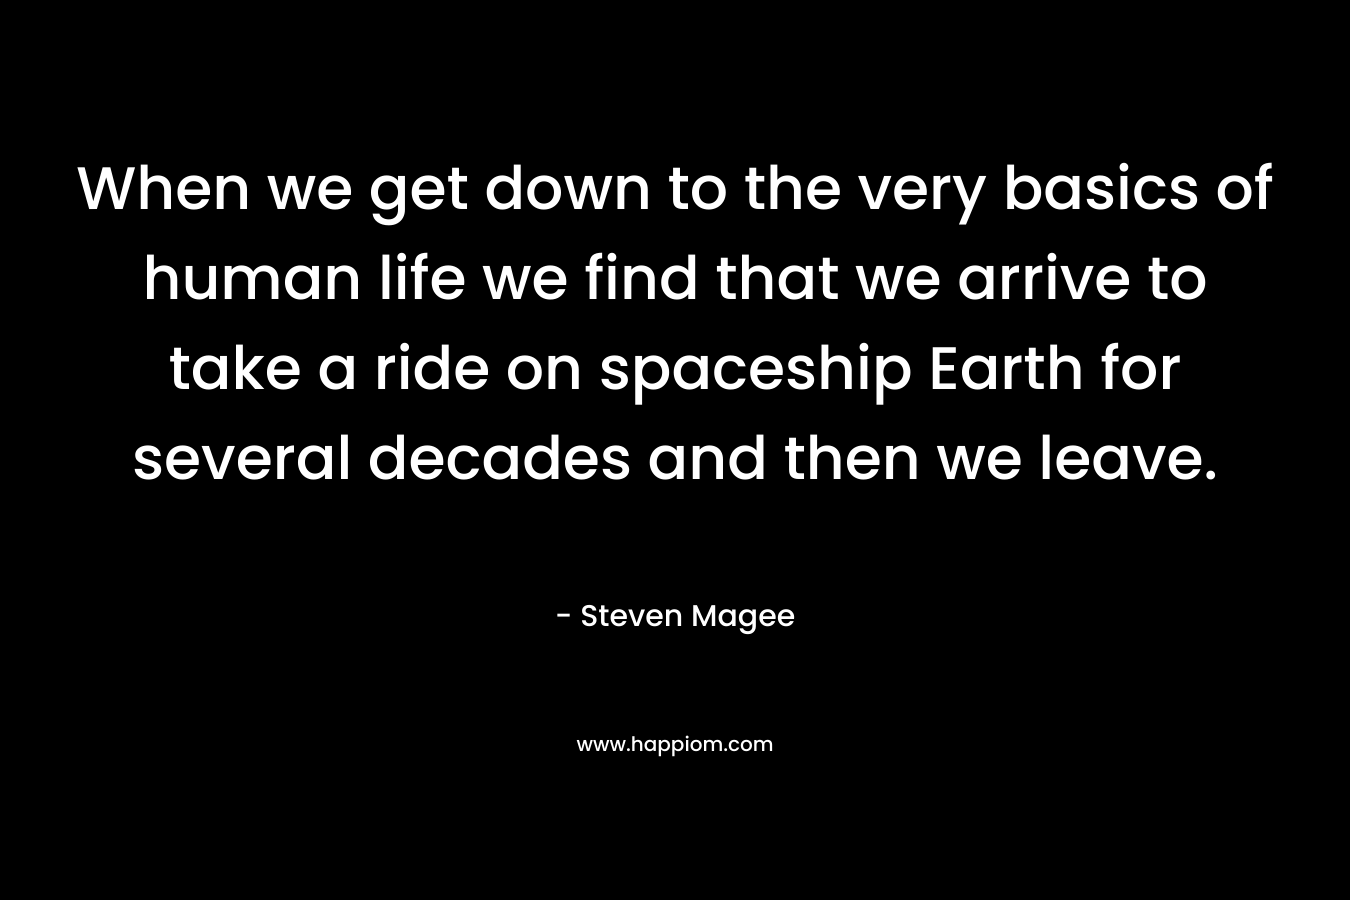 When we get down to the very basics of human life we find that we arrive to take a ride on spaceship Earth for several decades and then we leave. – Steven Magee